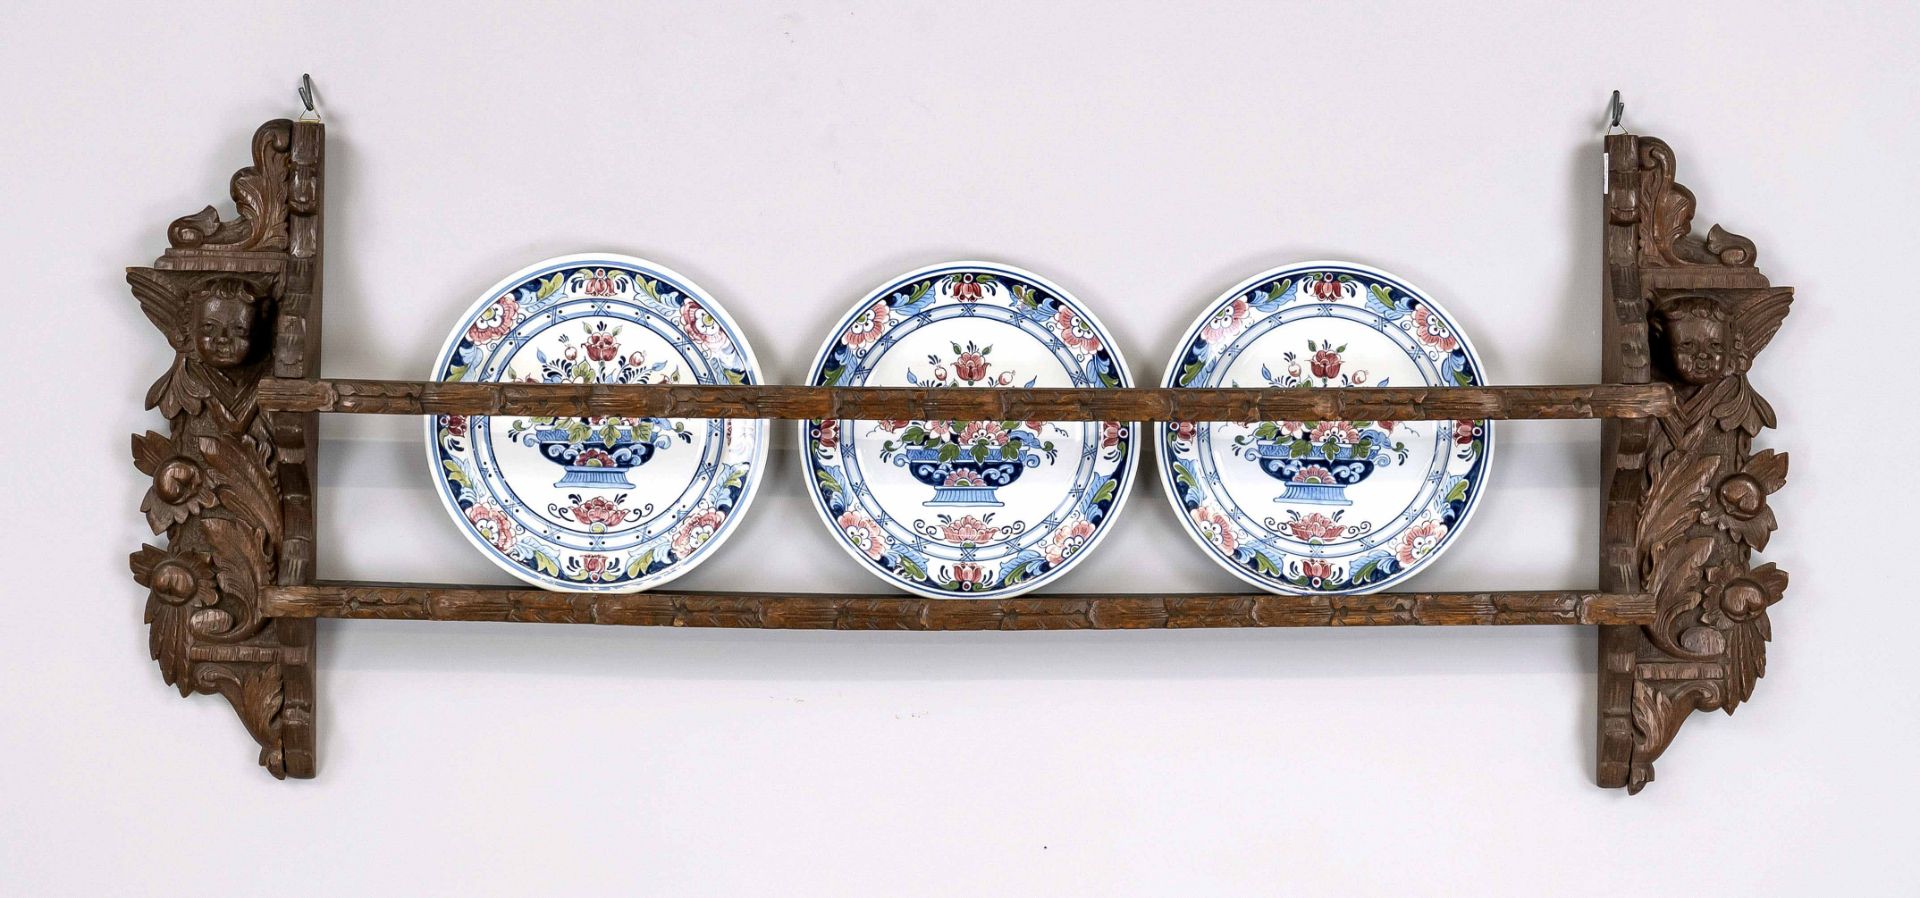 Plate shelf with 3 plates, Holland, 19th/20th c. Delft plate with polychrome floral decor. Carved